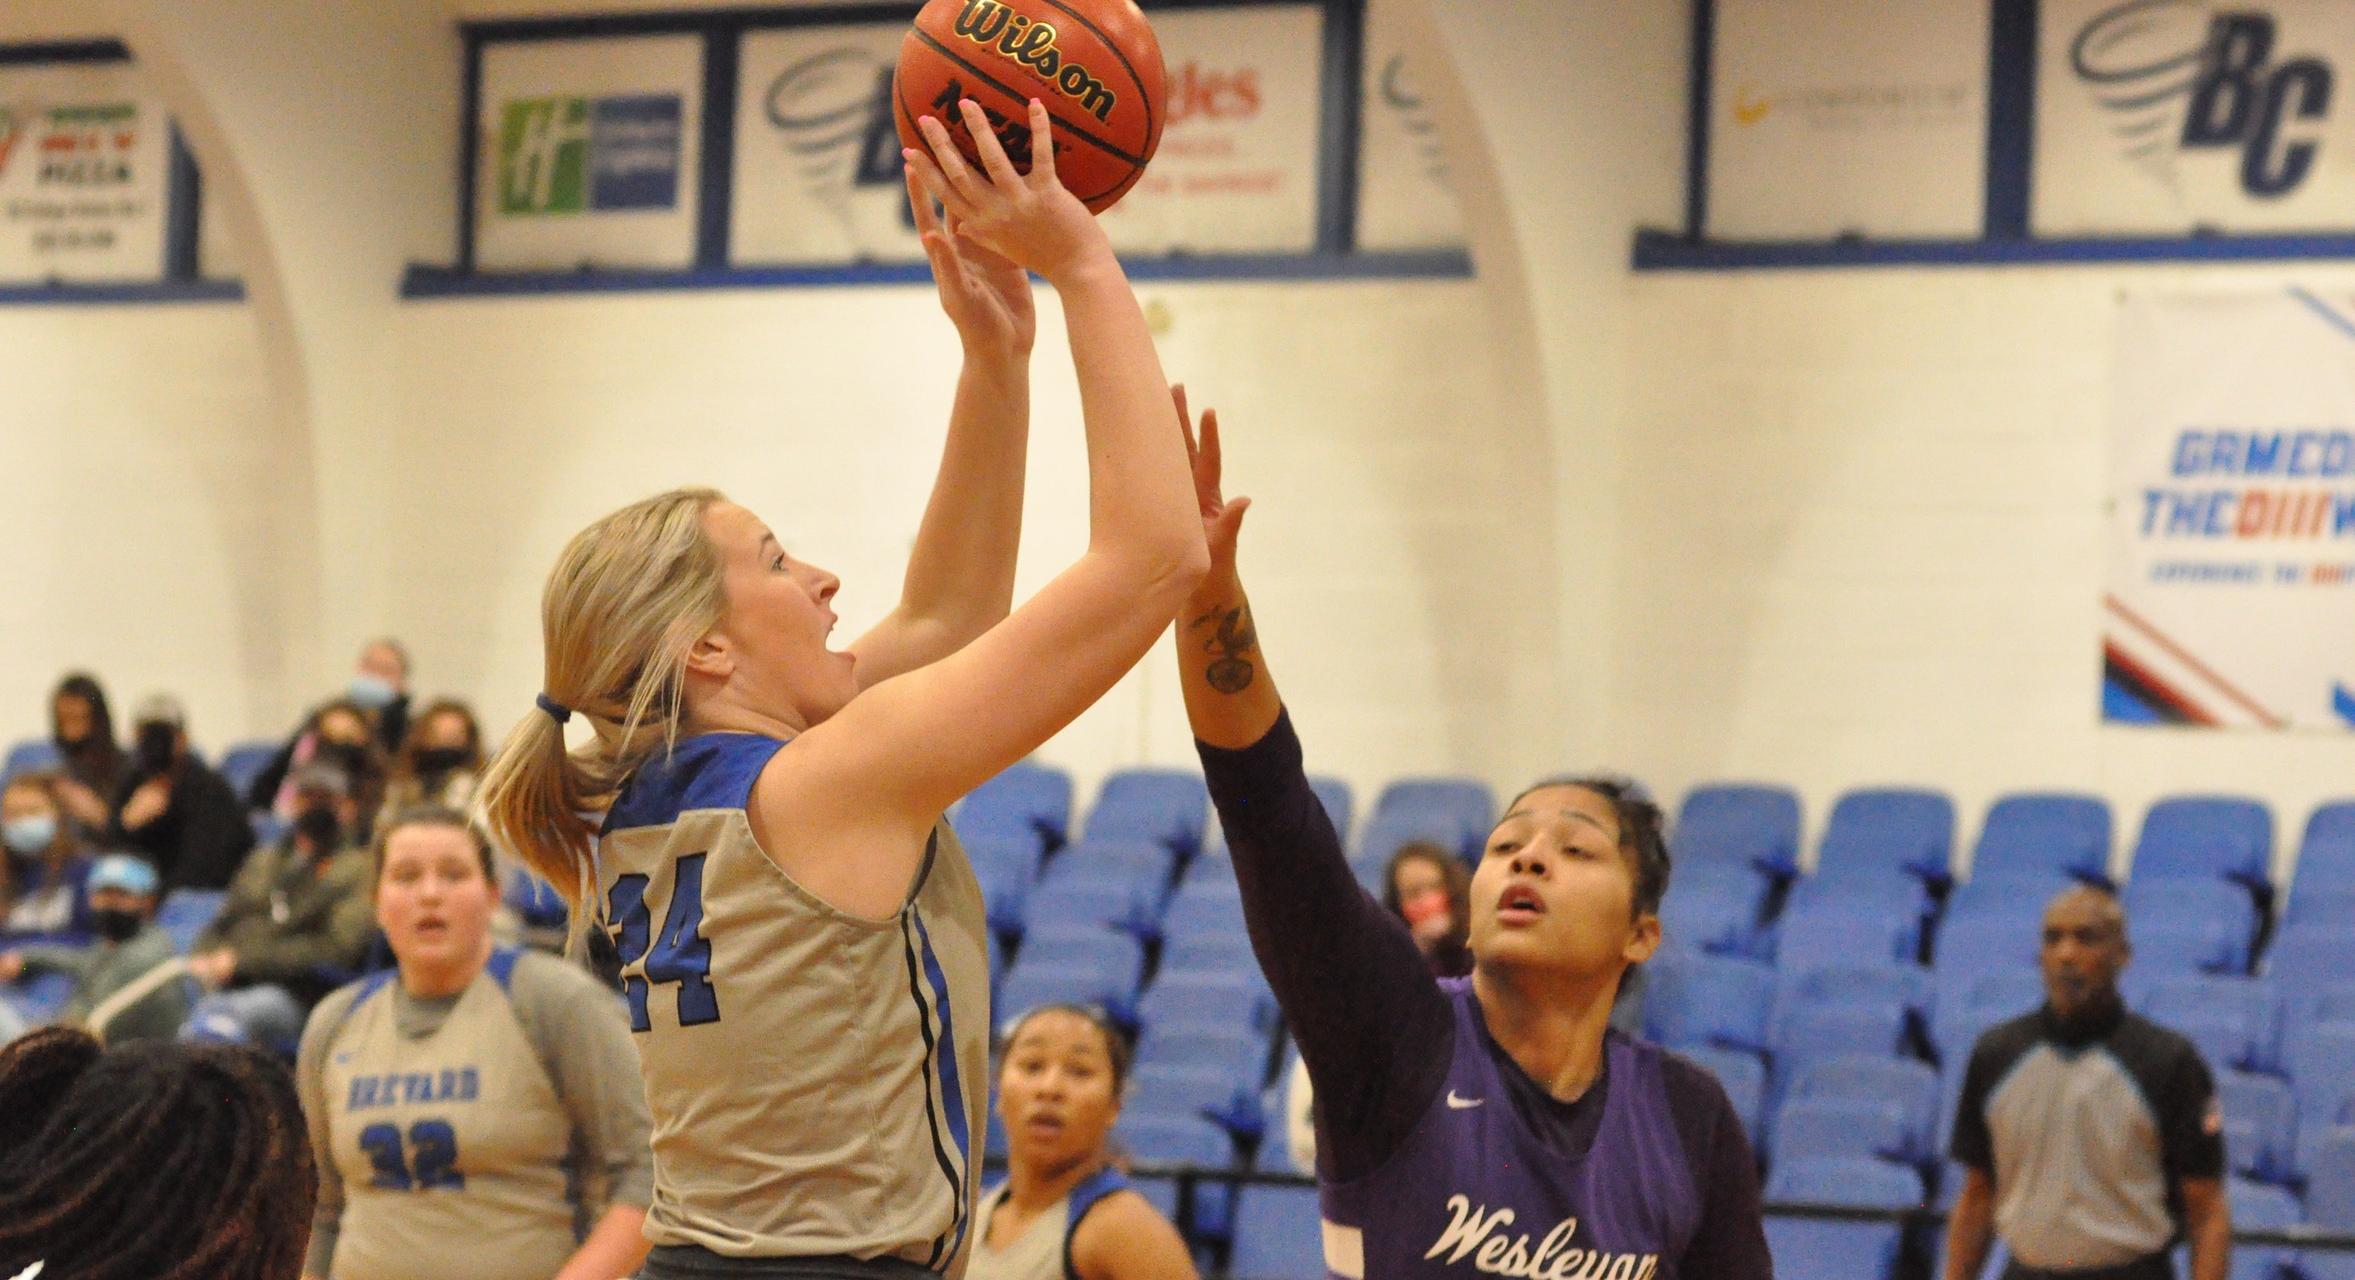 Makenna Parkins scored a career-high 27 points and blocked five shots (third-most in single-game program history) as Brevard defeated Agnes Scott, 70-52 (Photo courtesy of Tommy Moss)